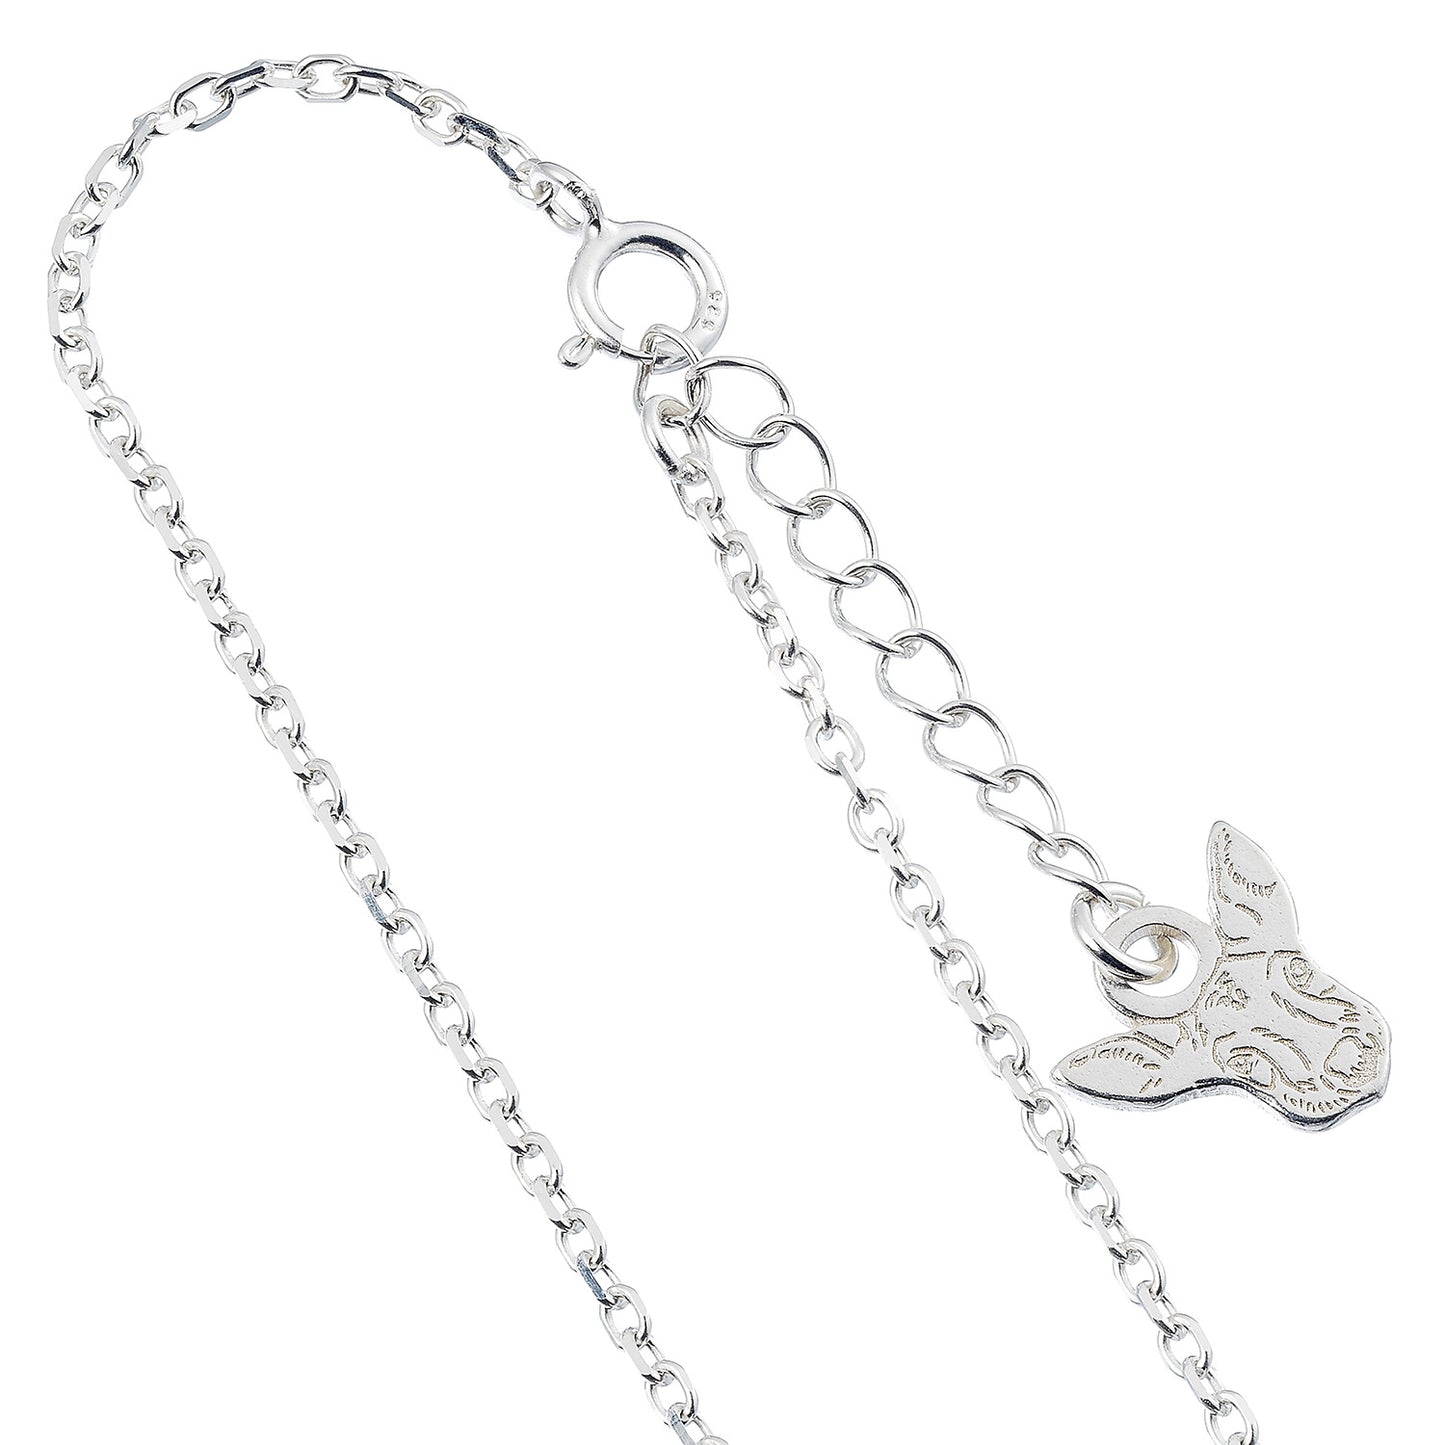 Harry Potter Always Necklace Embellished with Crystals - Sterling Silver